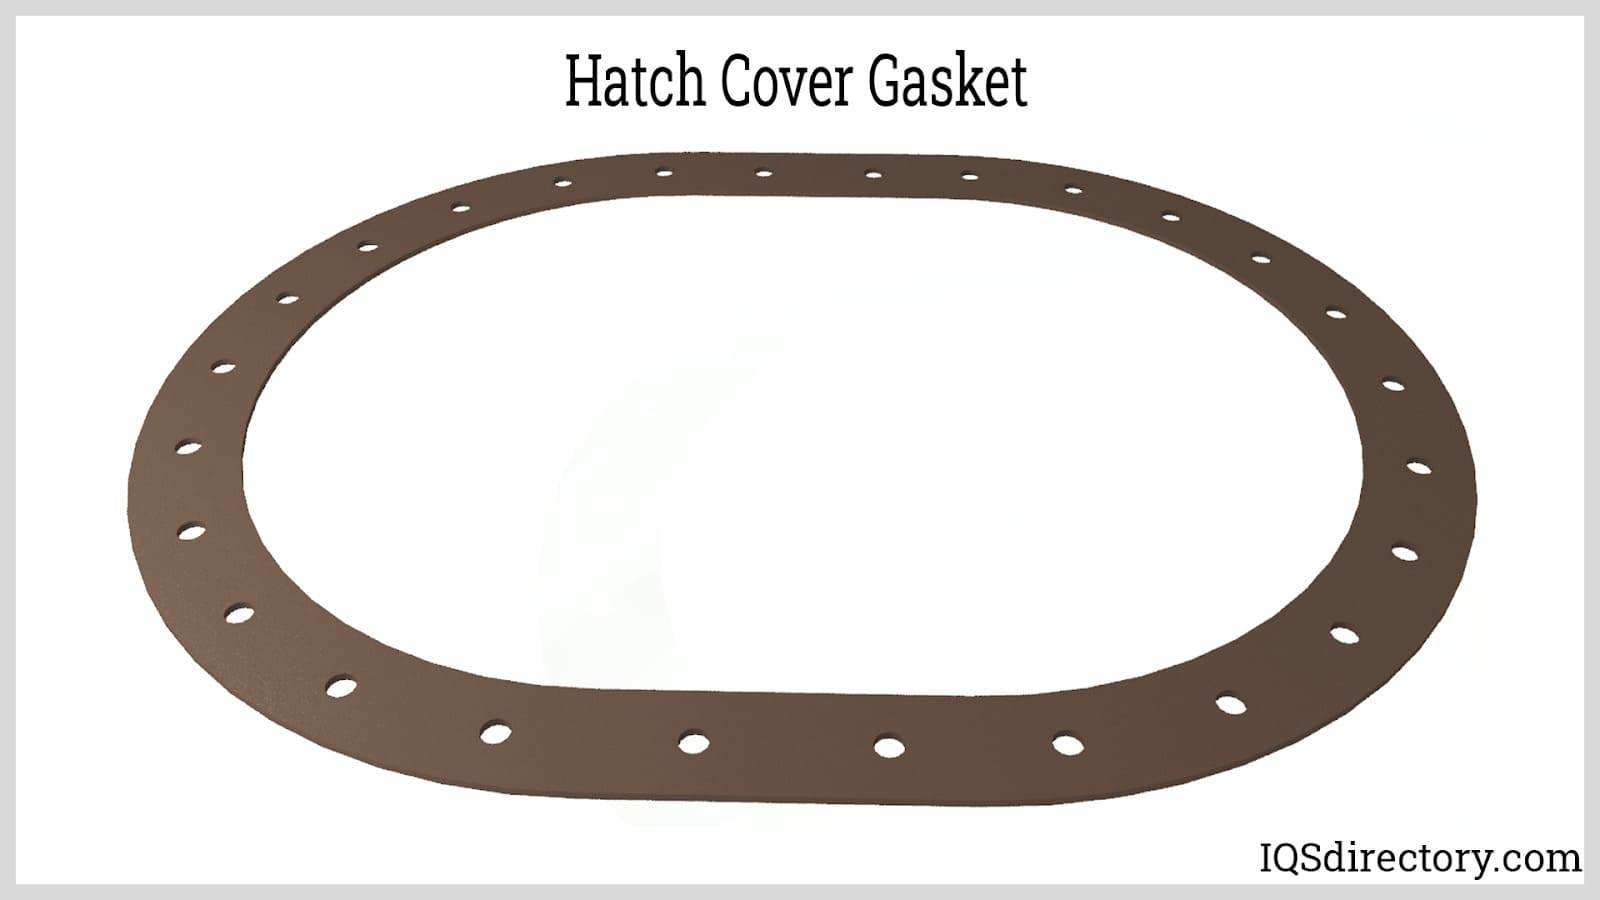 Hatch Cover Gasket